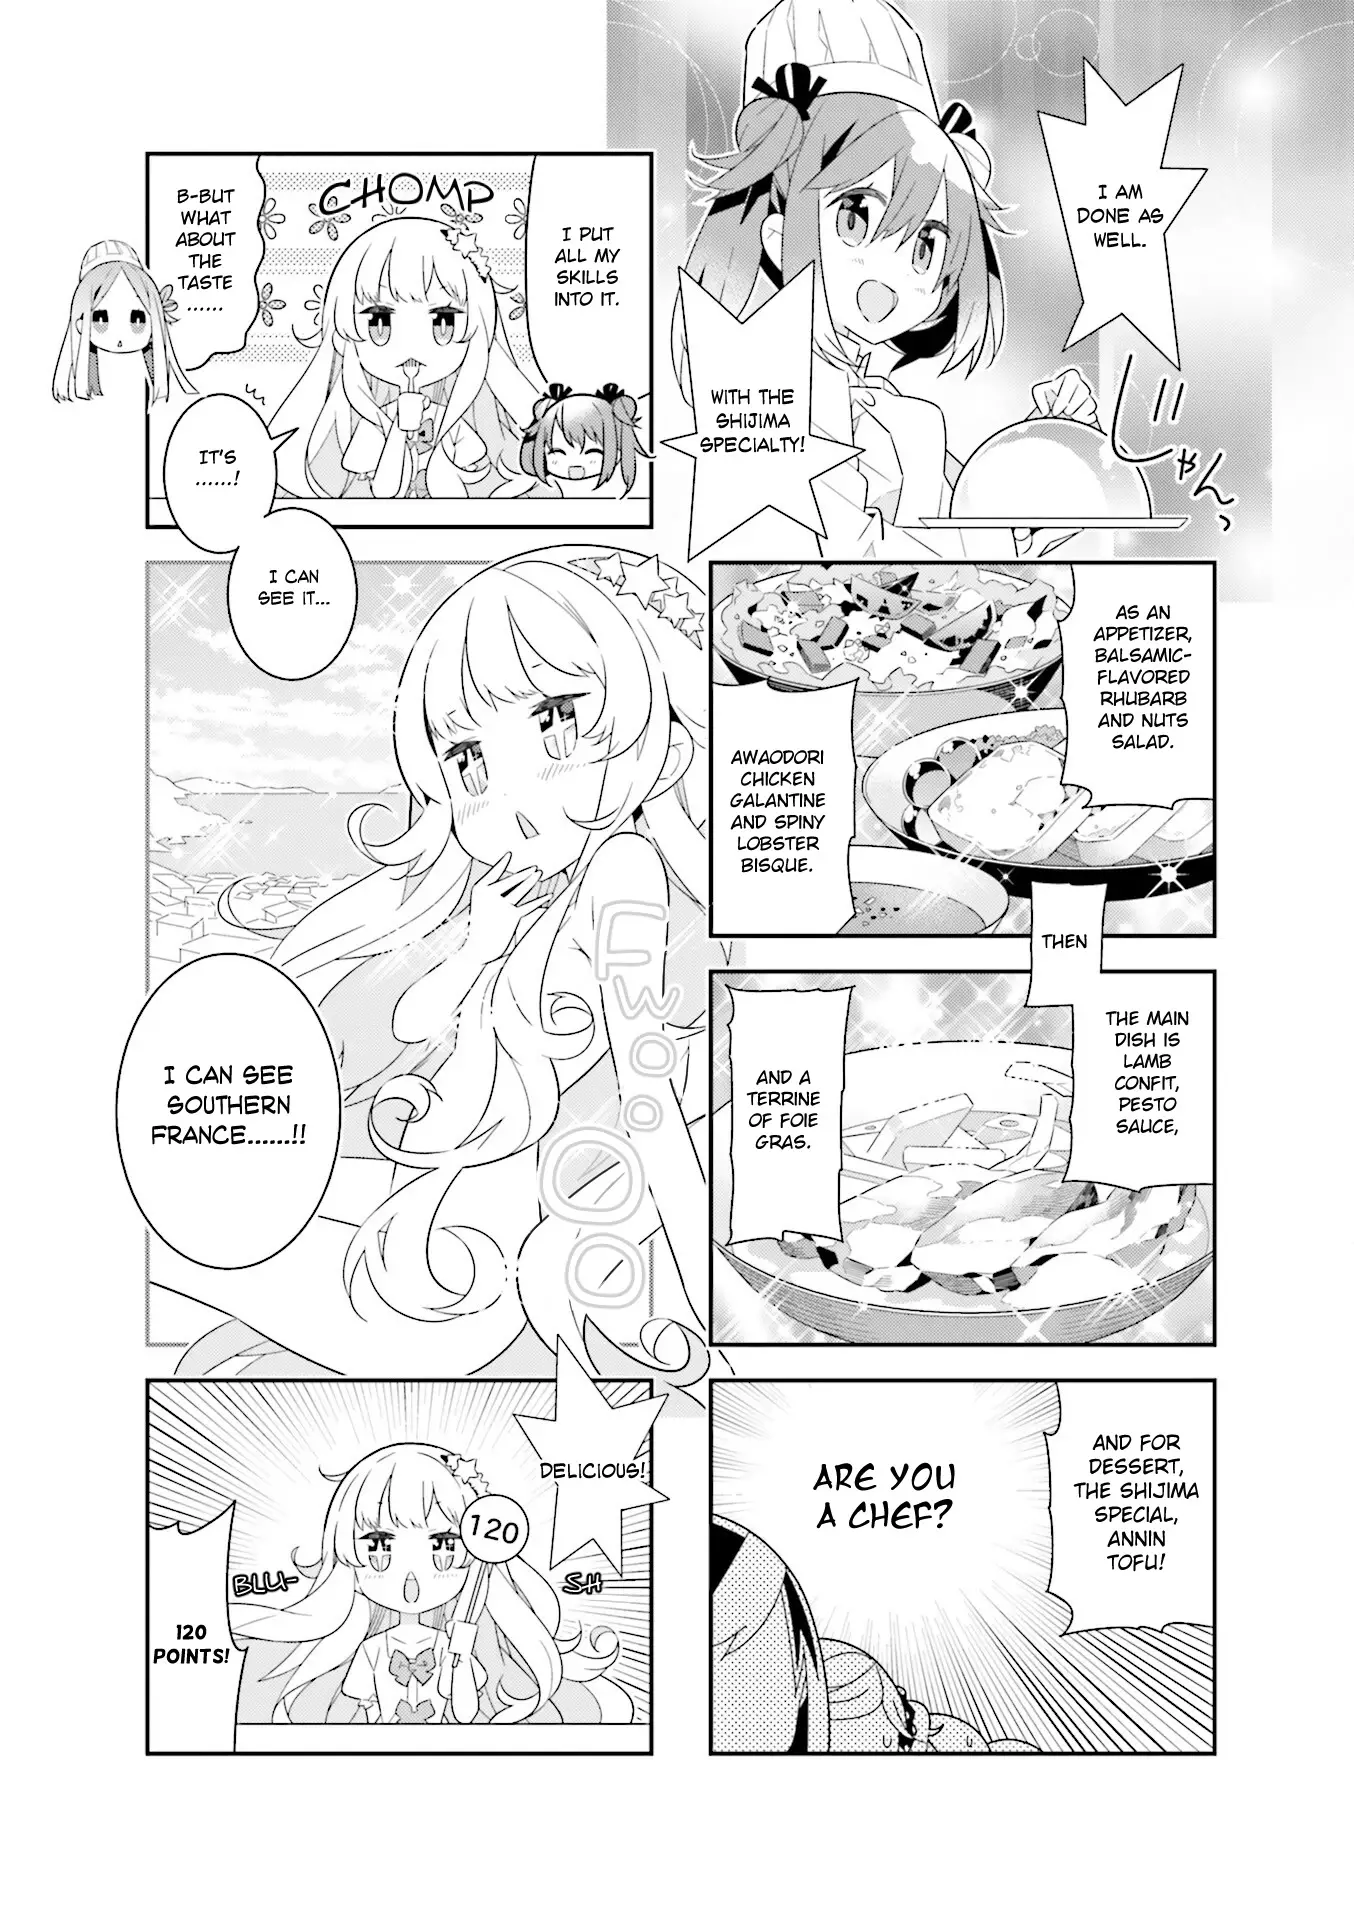 The Life After Retirement Of Magical Girls - 18 page 6-3c4f1c34